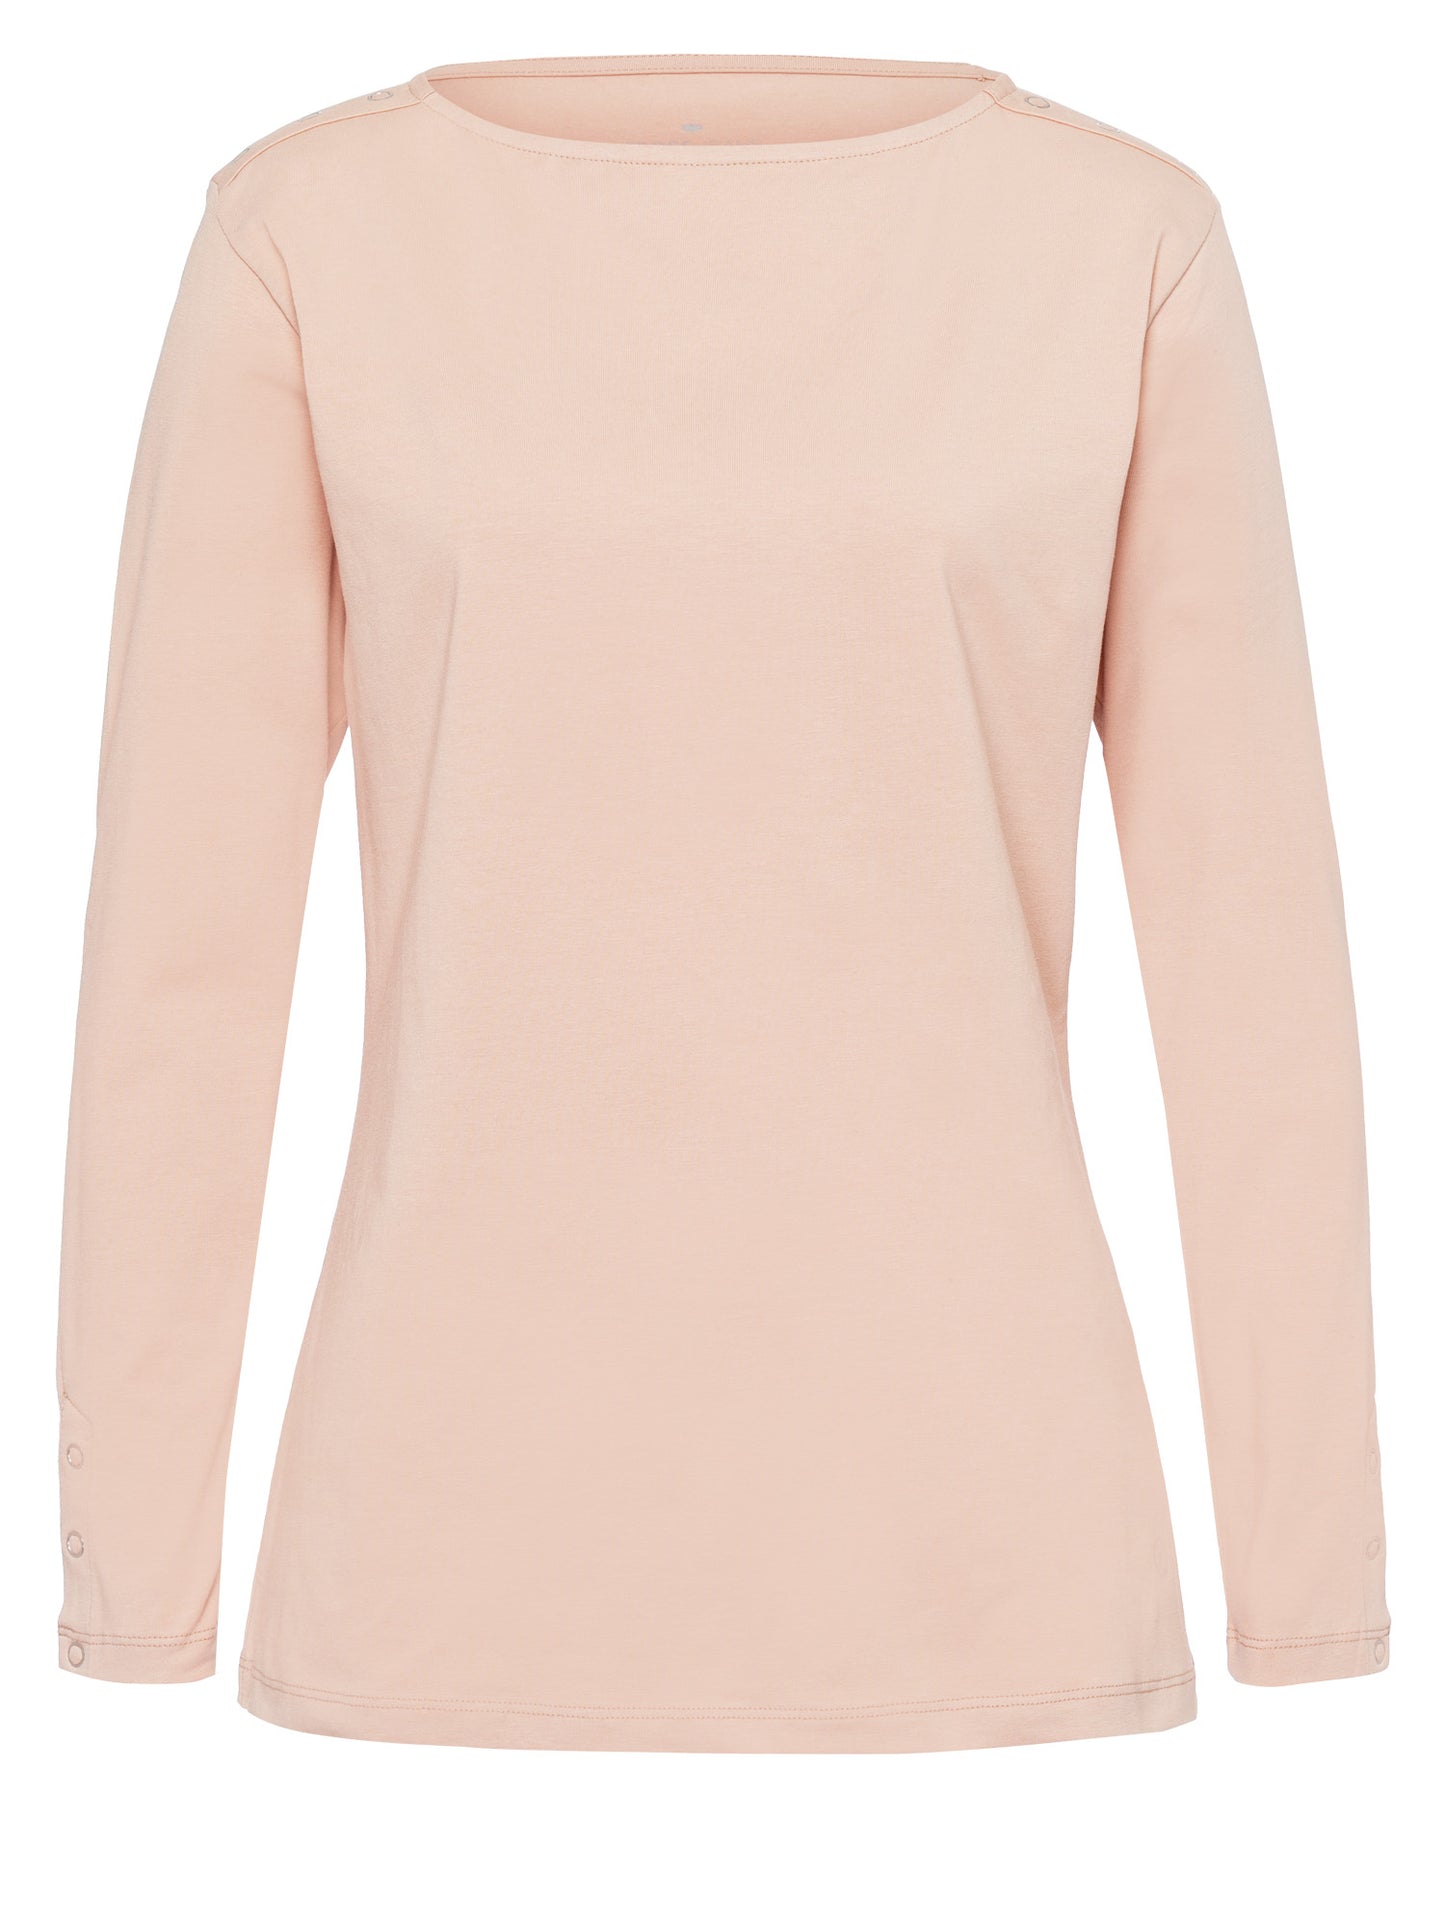 Women's slim long-sleeved shirt with button details, beige